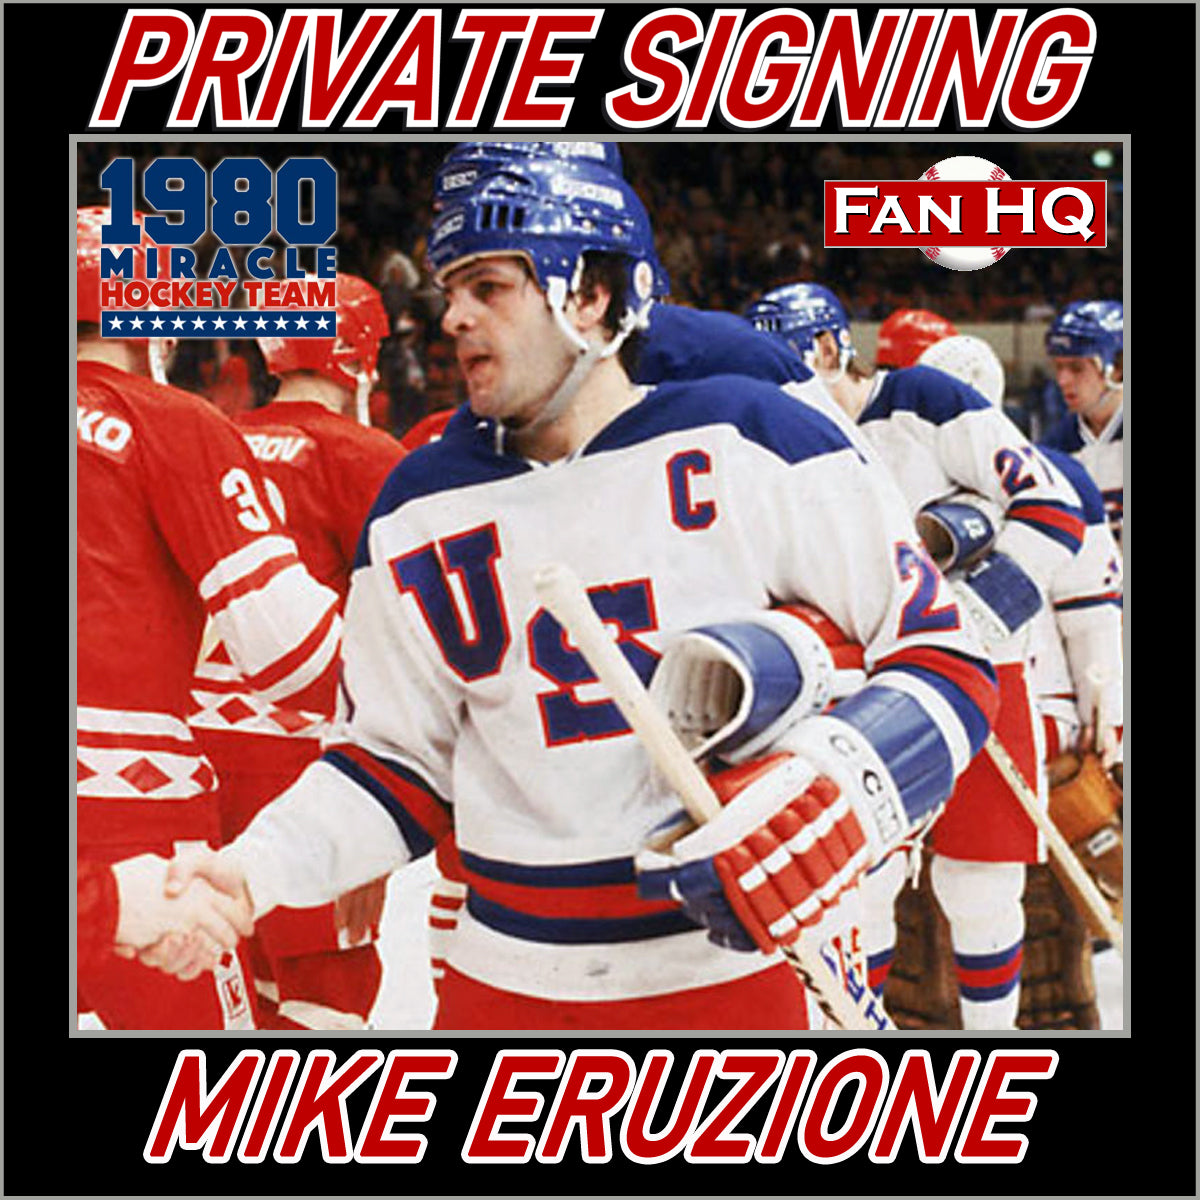 Meet-and-Greet with Mike Eruzione